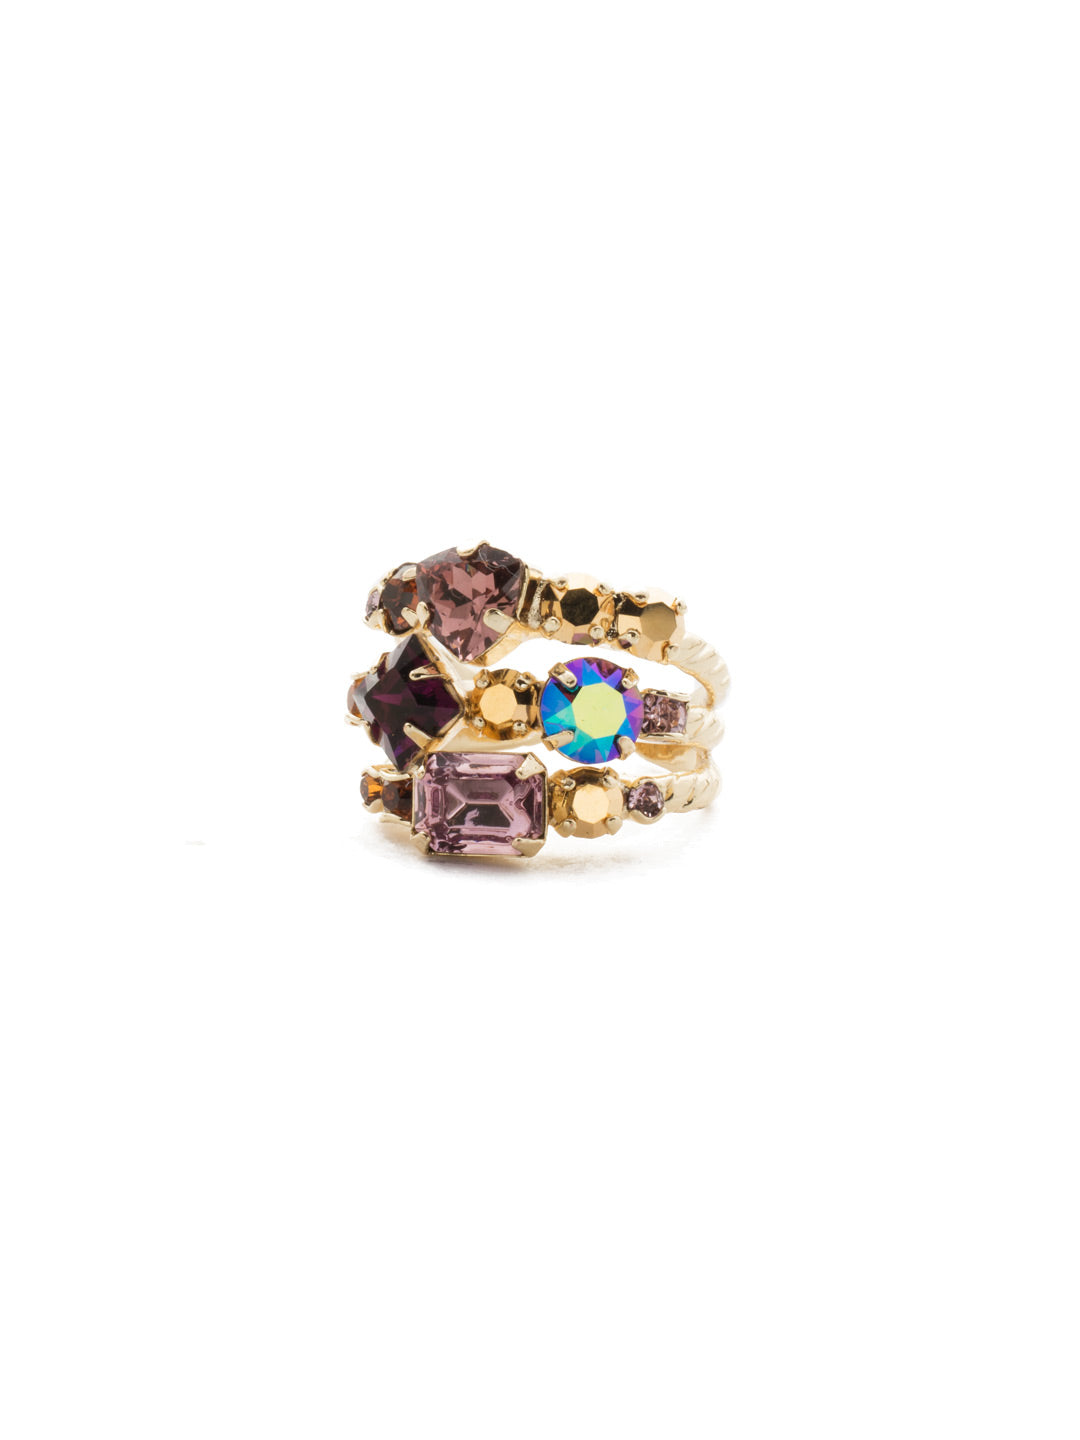 Sedge Stacked Ring - RDX1BGSUN - This adjustable ring features three layers of crystals to create the illusion of three stackable rings. From Sorrelli's Sundance collection in our Bright Gold-tone finish.